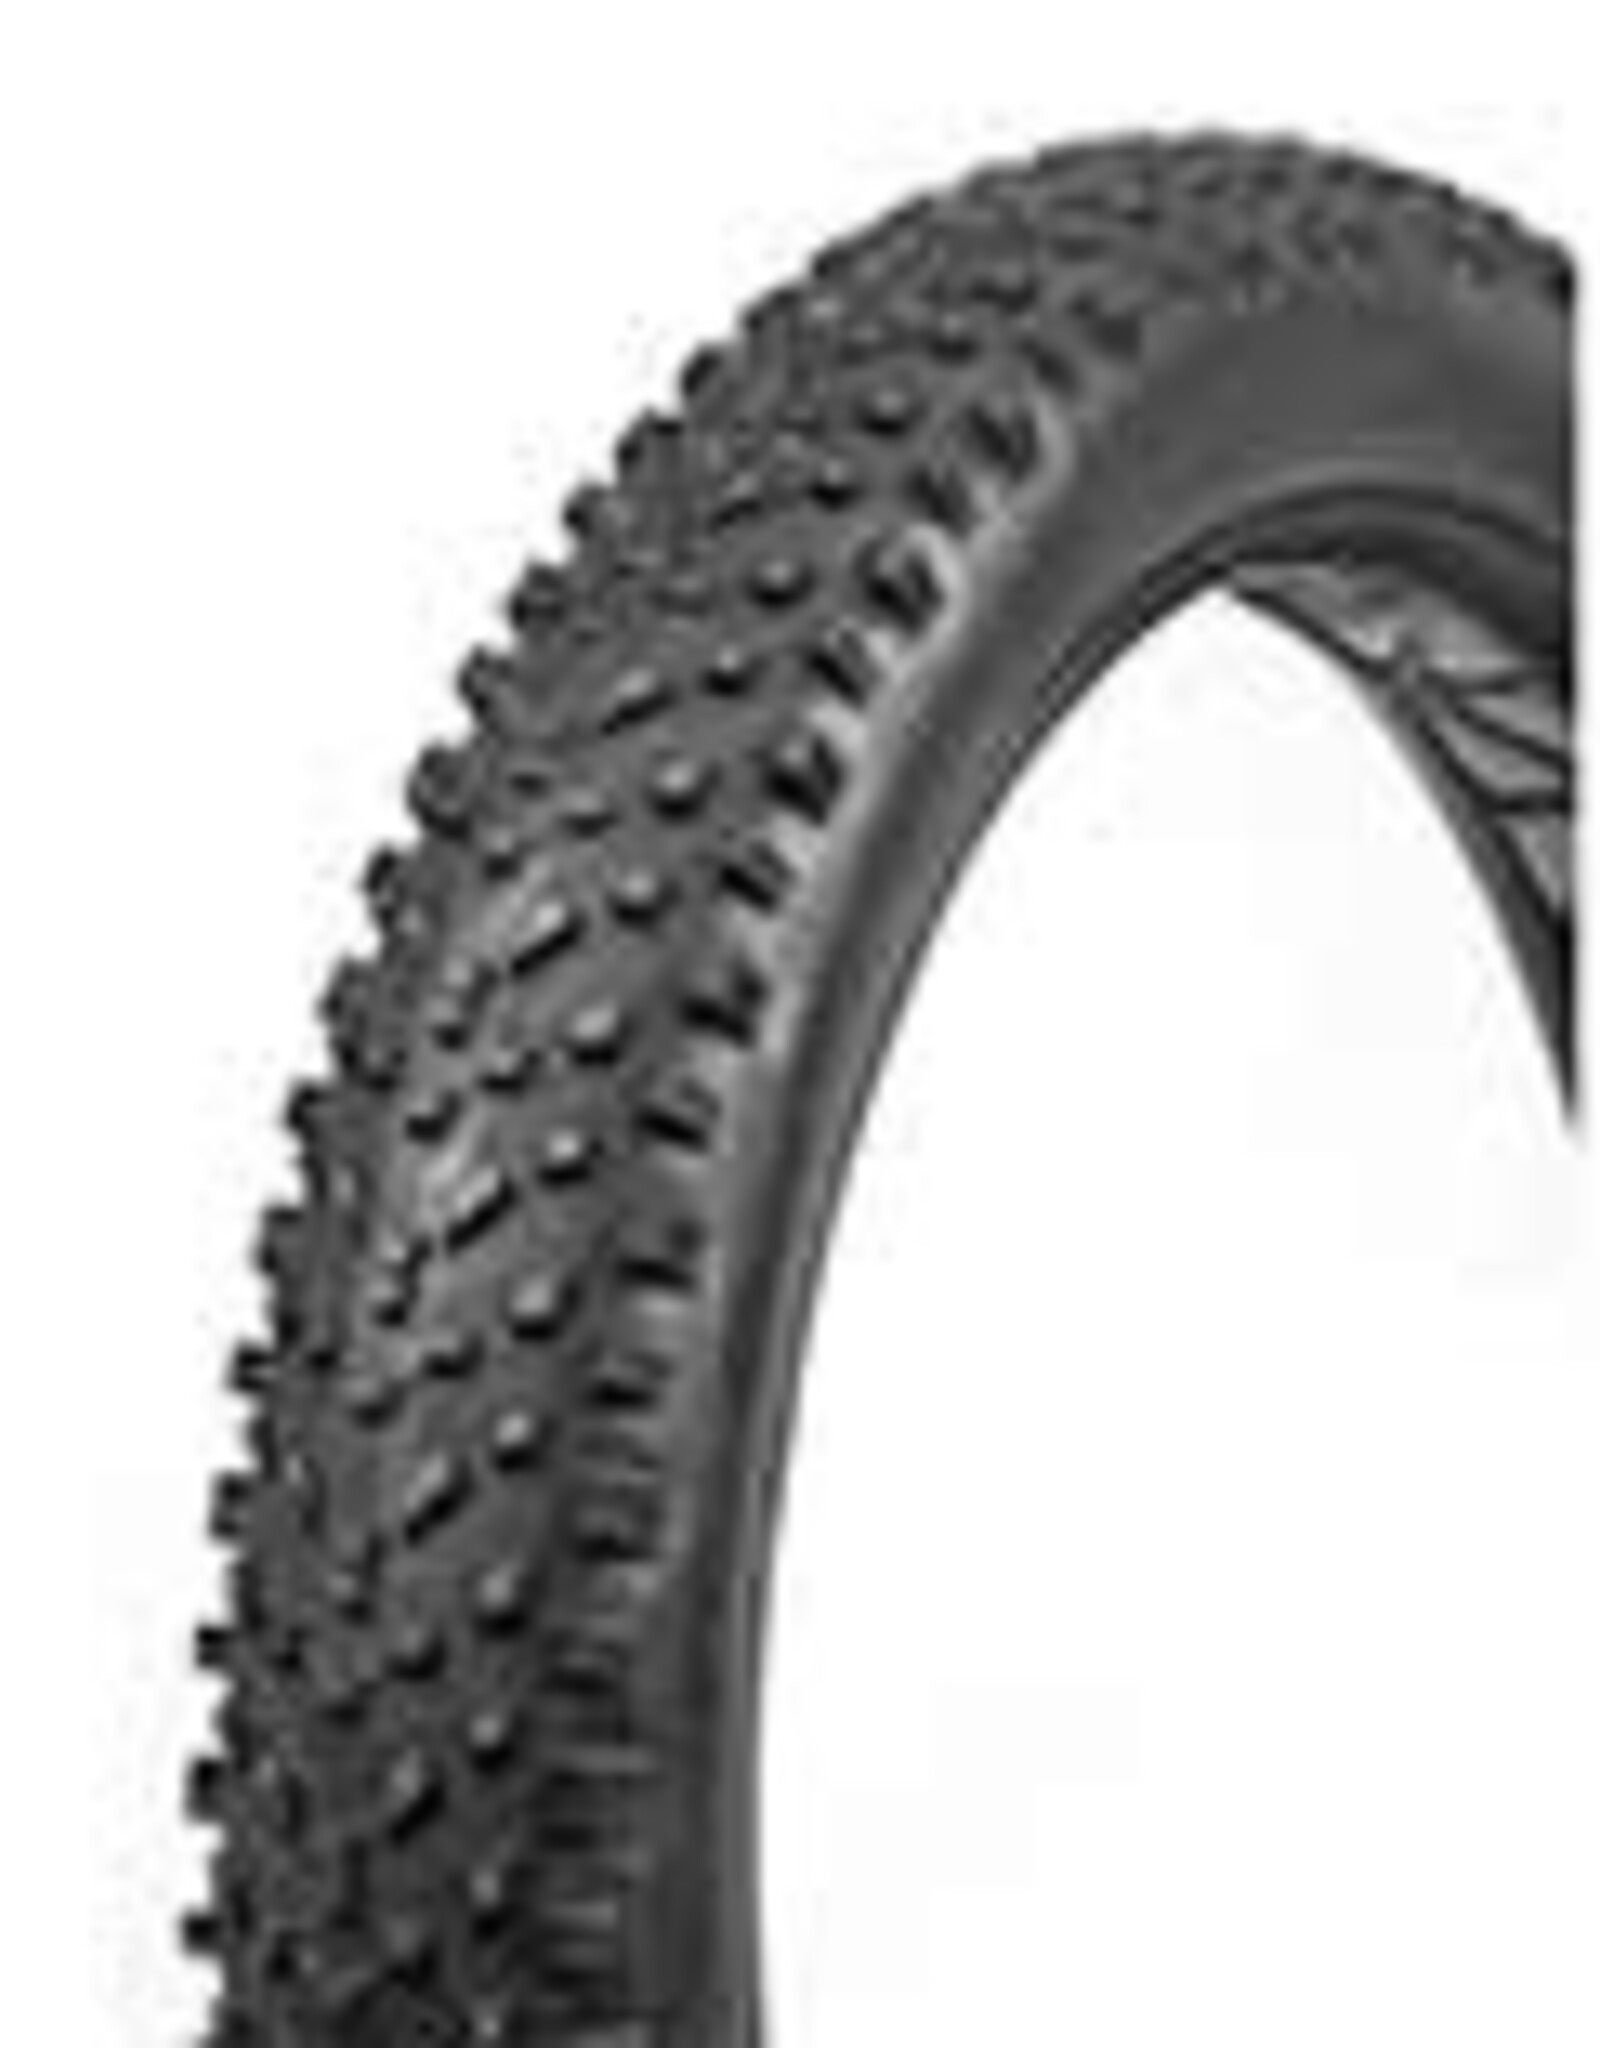 Vee Rubber, Snow Avalanche Clouté, 26x4.80 Tubeless Silica 120TPI